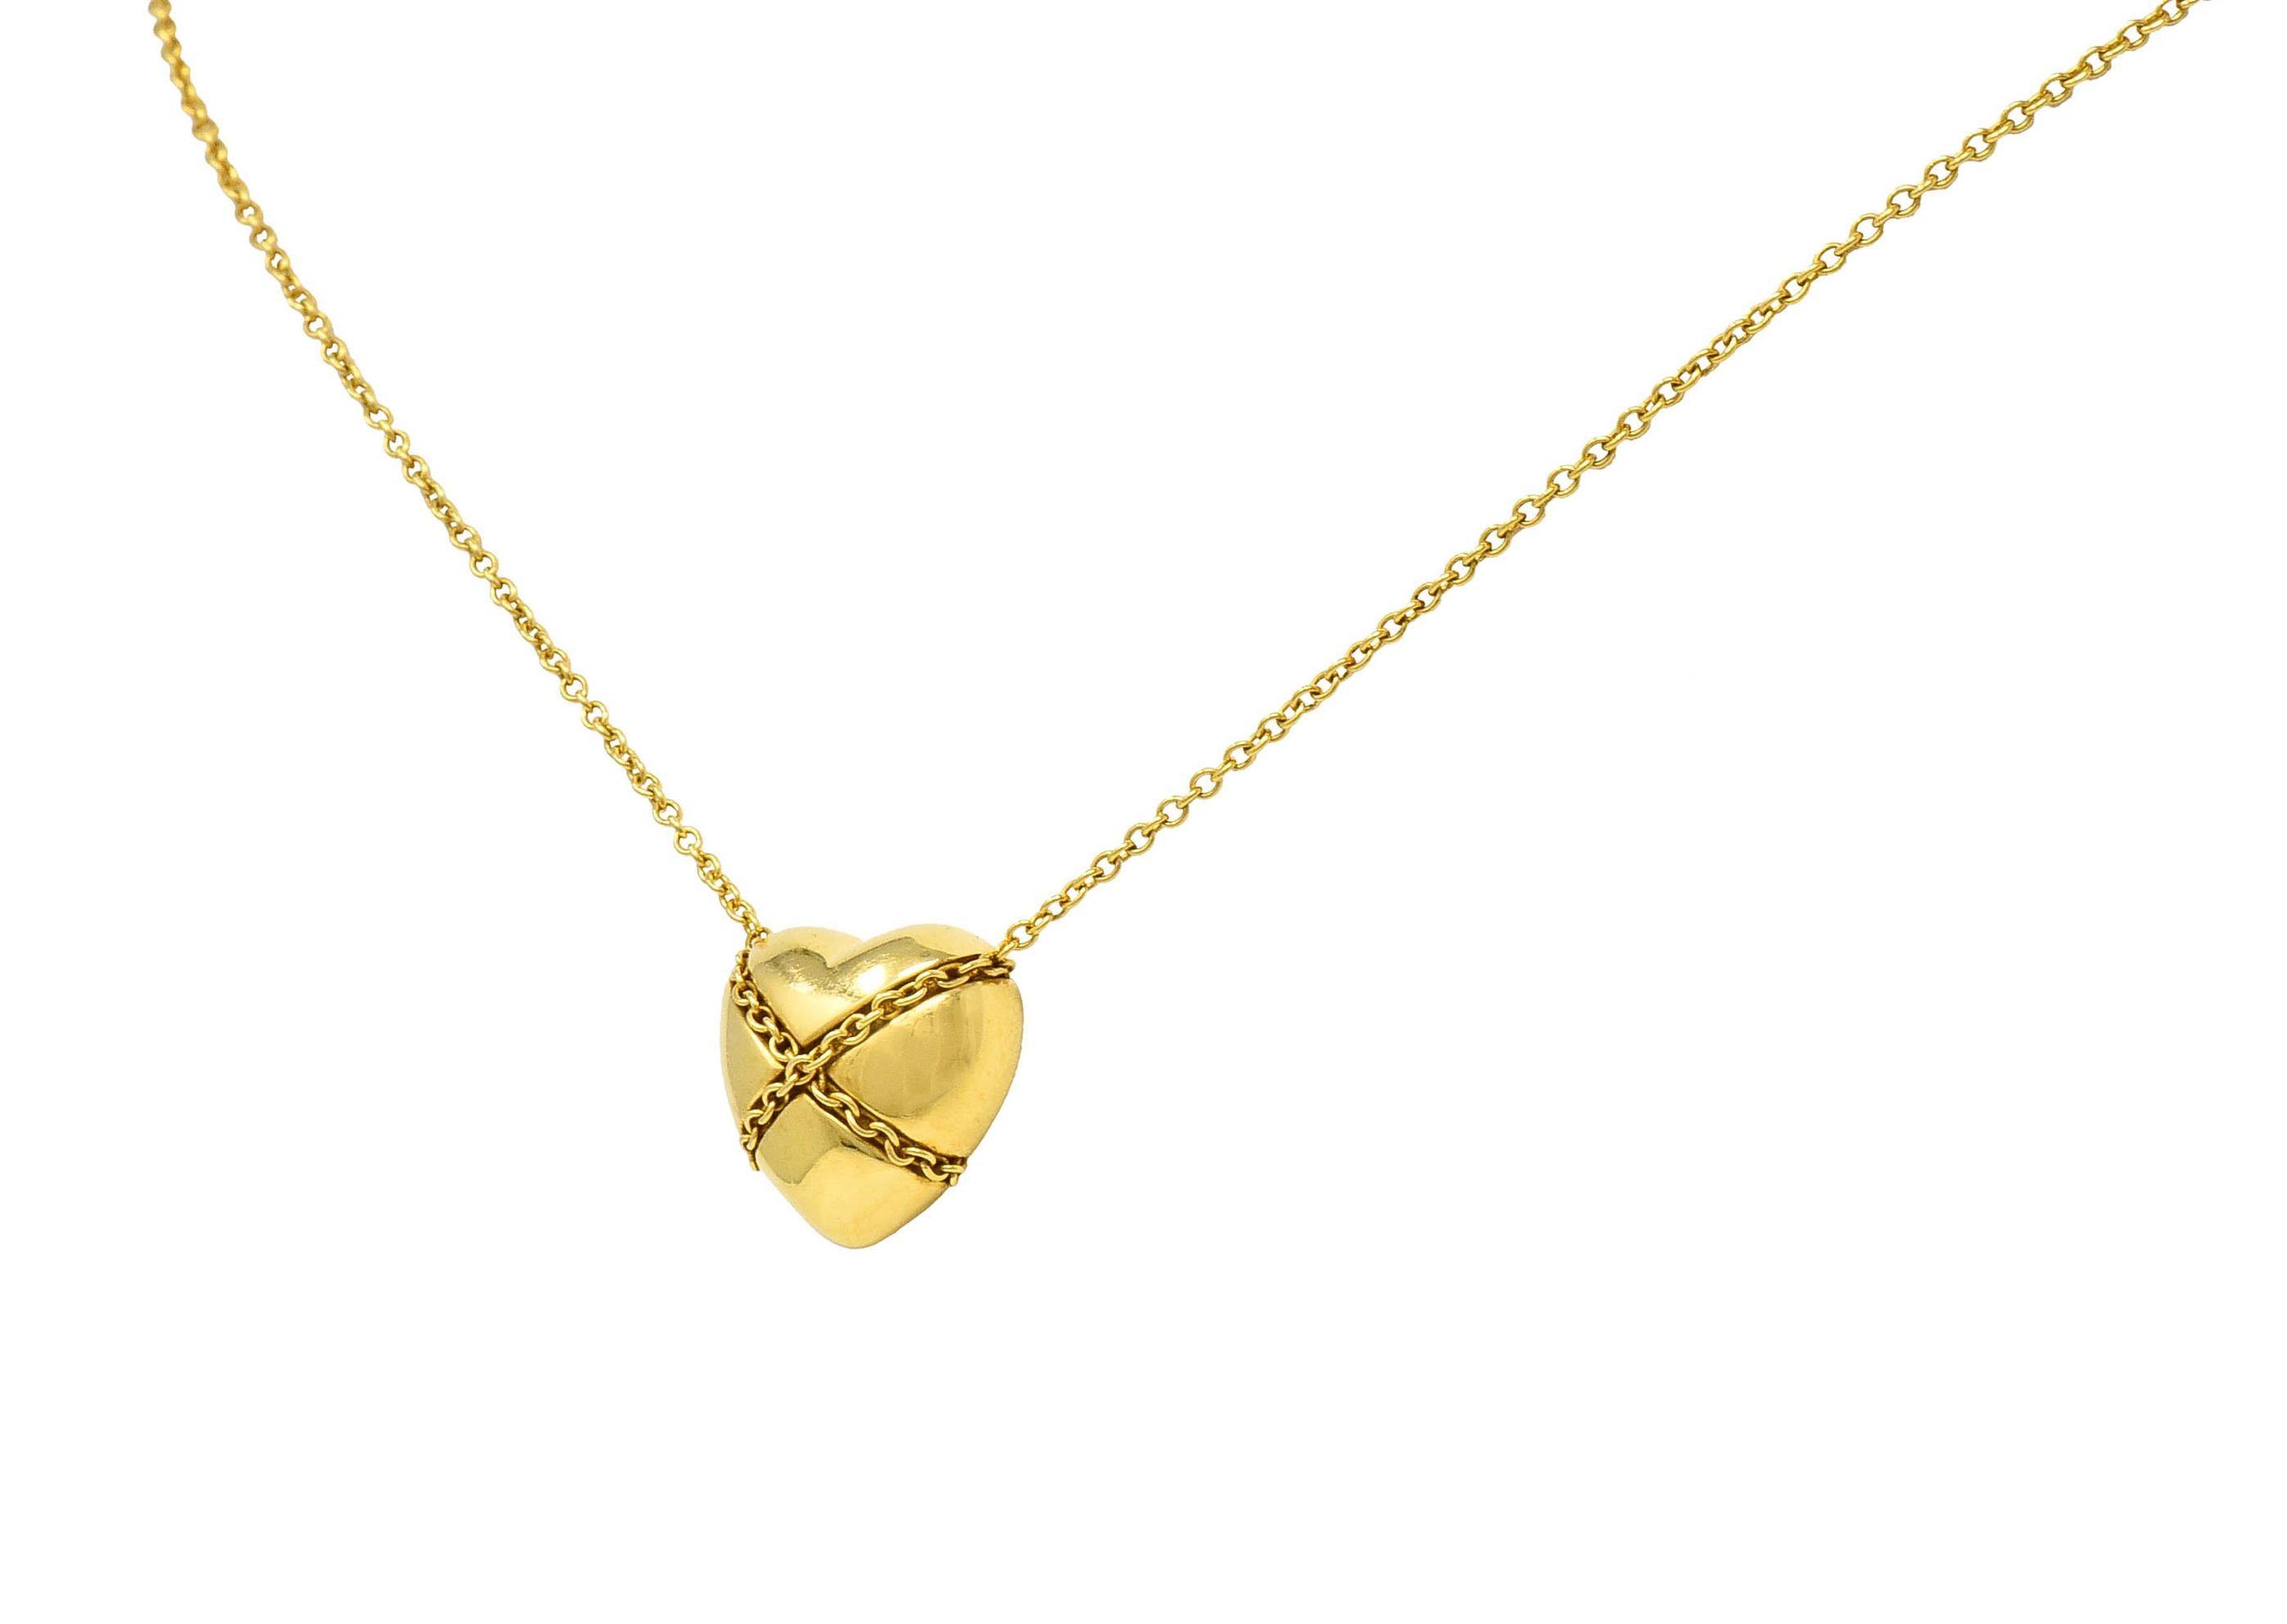 Classic curb chain necklace centers a brightly polished heart

Tightly wrapped with curb chain in an X motif

Necklace completes as a spring ring clasp

Both chain and heart are stamped 750 for 18 karat gold

Heart is stamped T & Co. and chain is